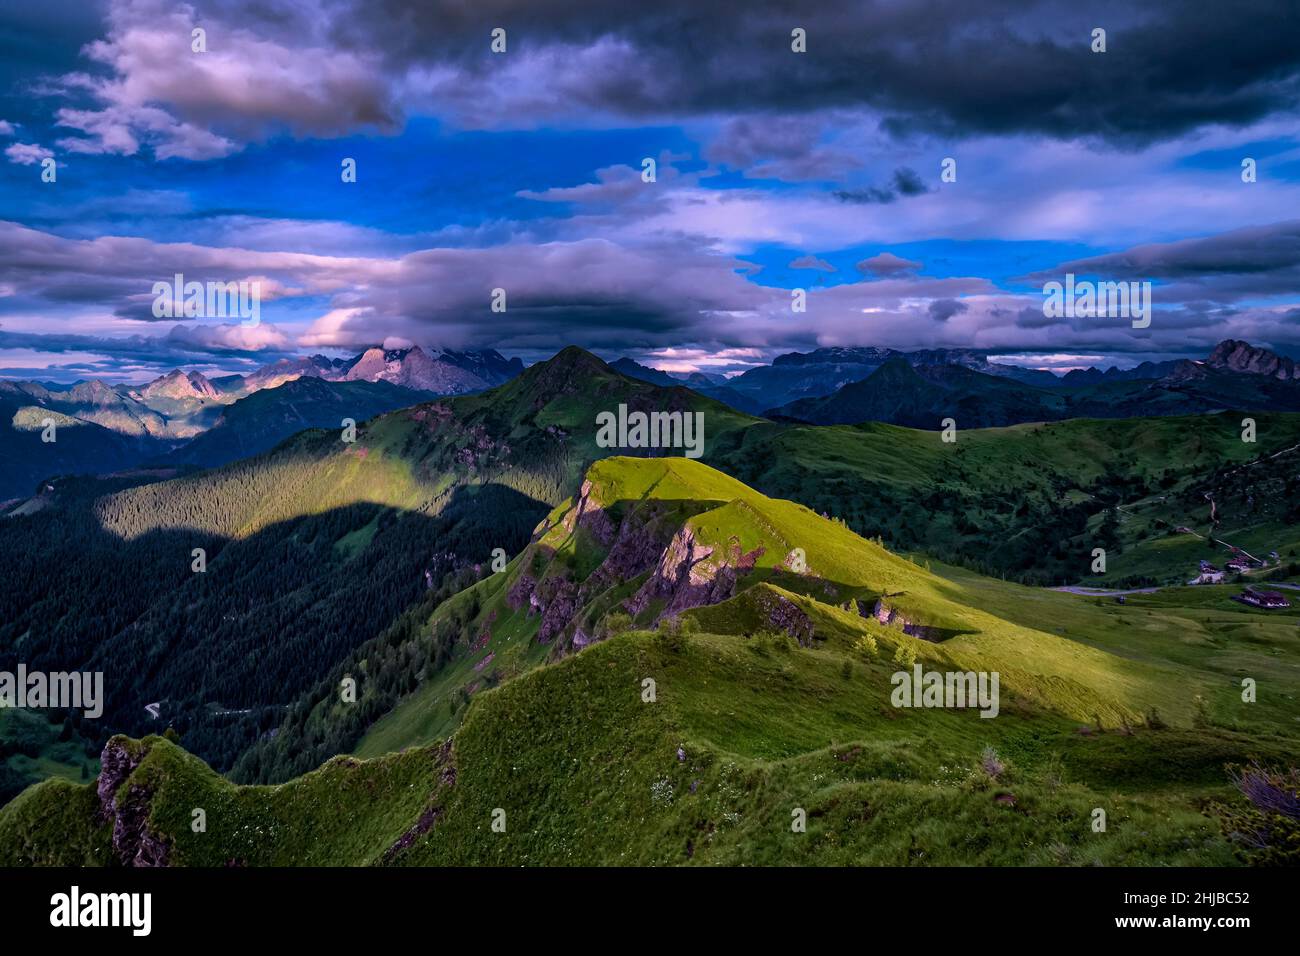 View from Punta di Zonia above Giau Pass, Passo di Giau, to Monte Pore (middle), Marmolada (left) and Sella group (right) at sunrise. Stock Photo